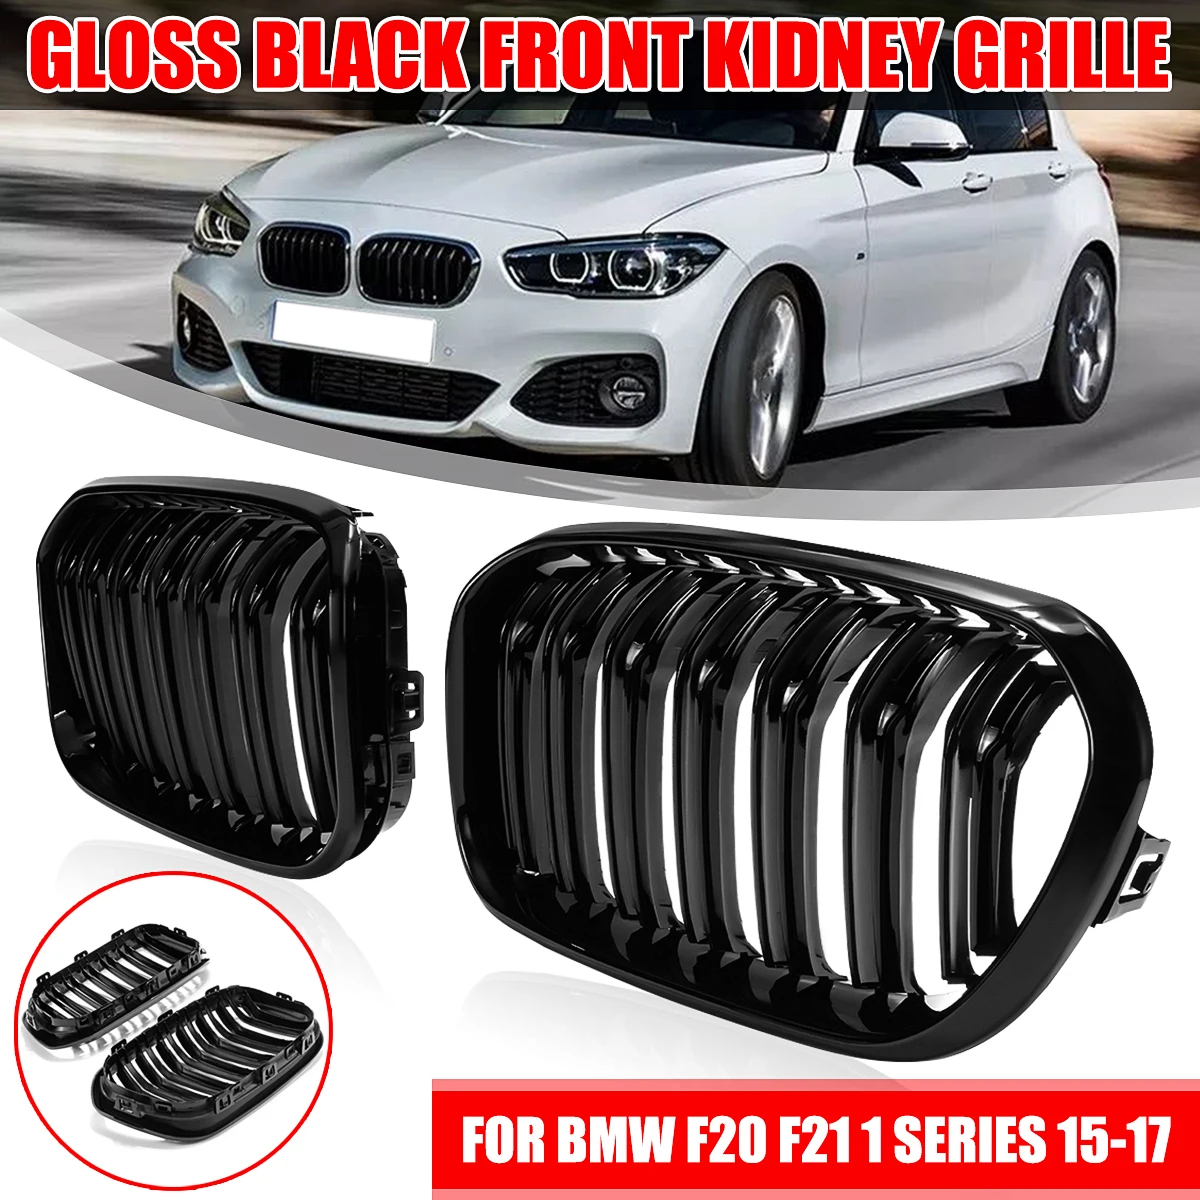 

Pair Double Slat Replacement Racing Grill Grille For BMW 1 Series F20 F21 LCI 120i 2015-2019 Car Front Bumper Kidney Grilles